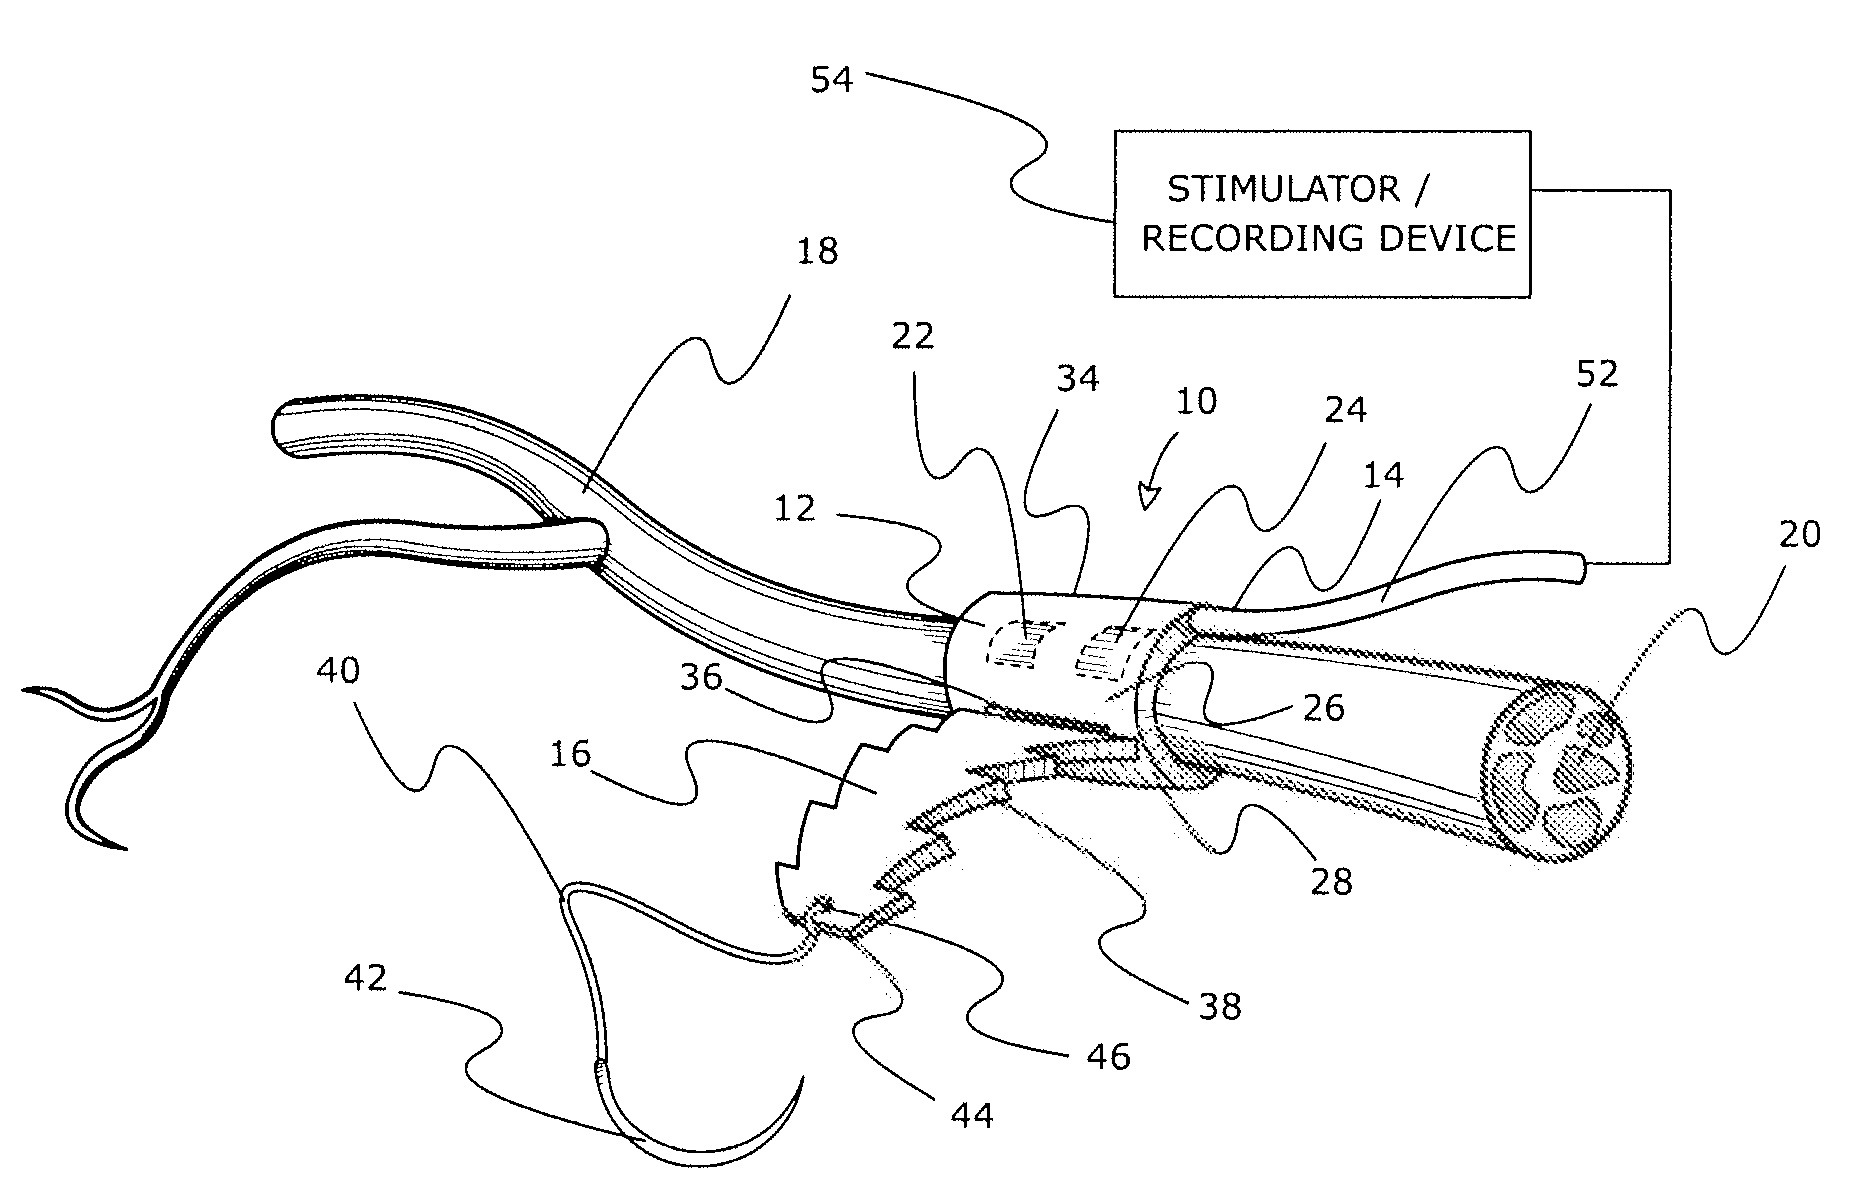 Adjustable tissue or nerve cuff and method of use